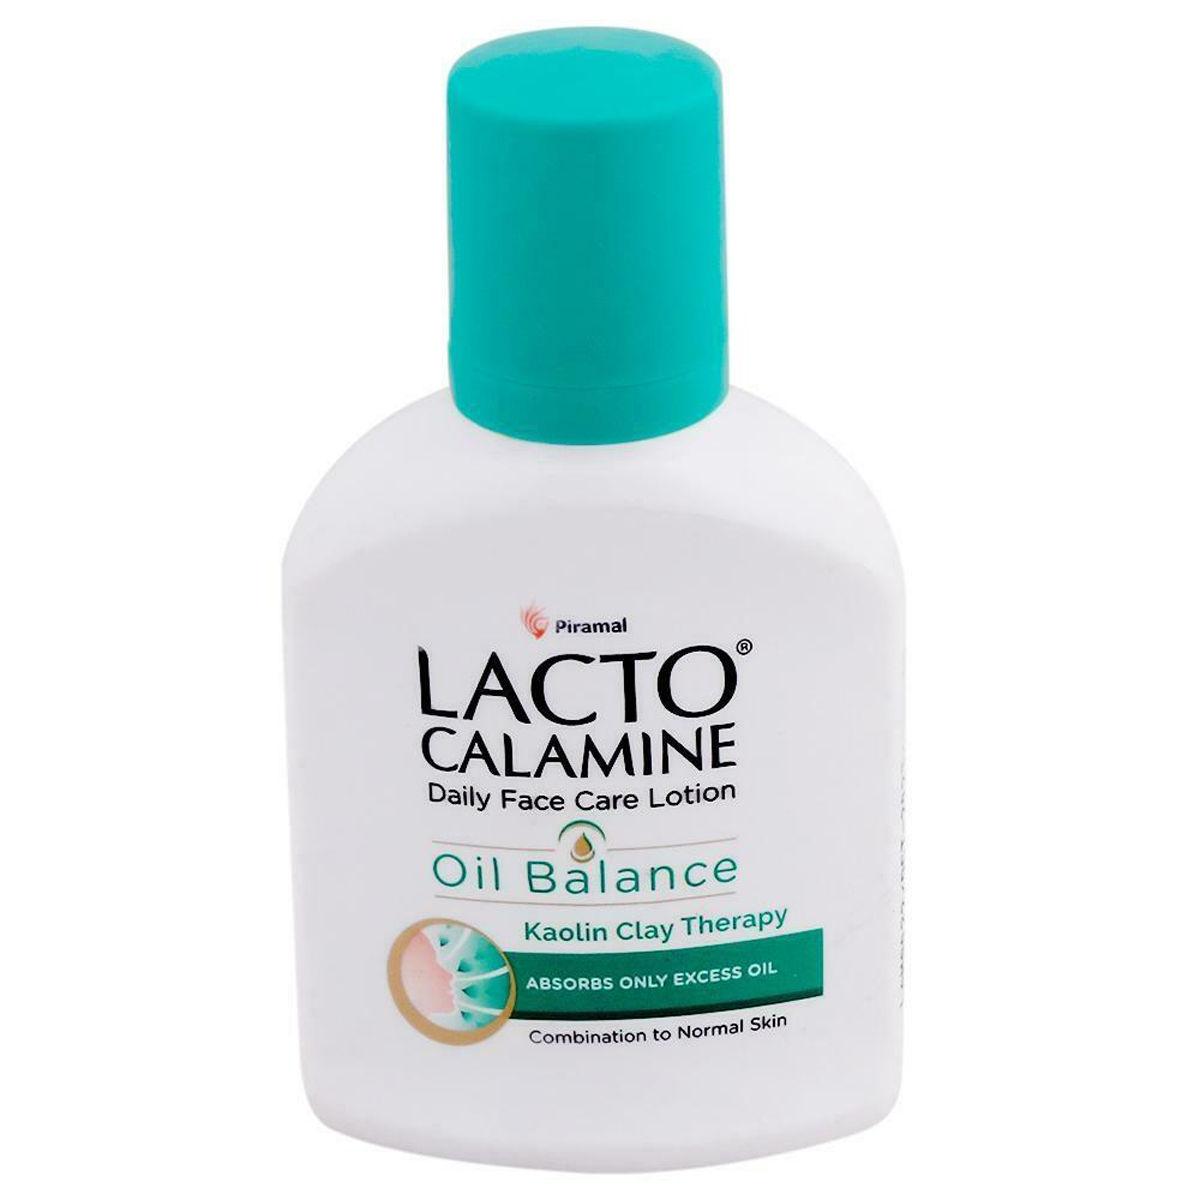 Lacto Calamine Oil Balance Daily Face Care Lotion For Combination To Normal Skin Ml Price